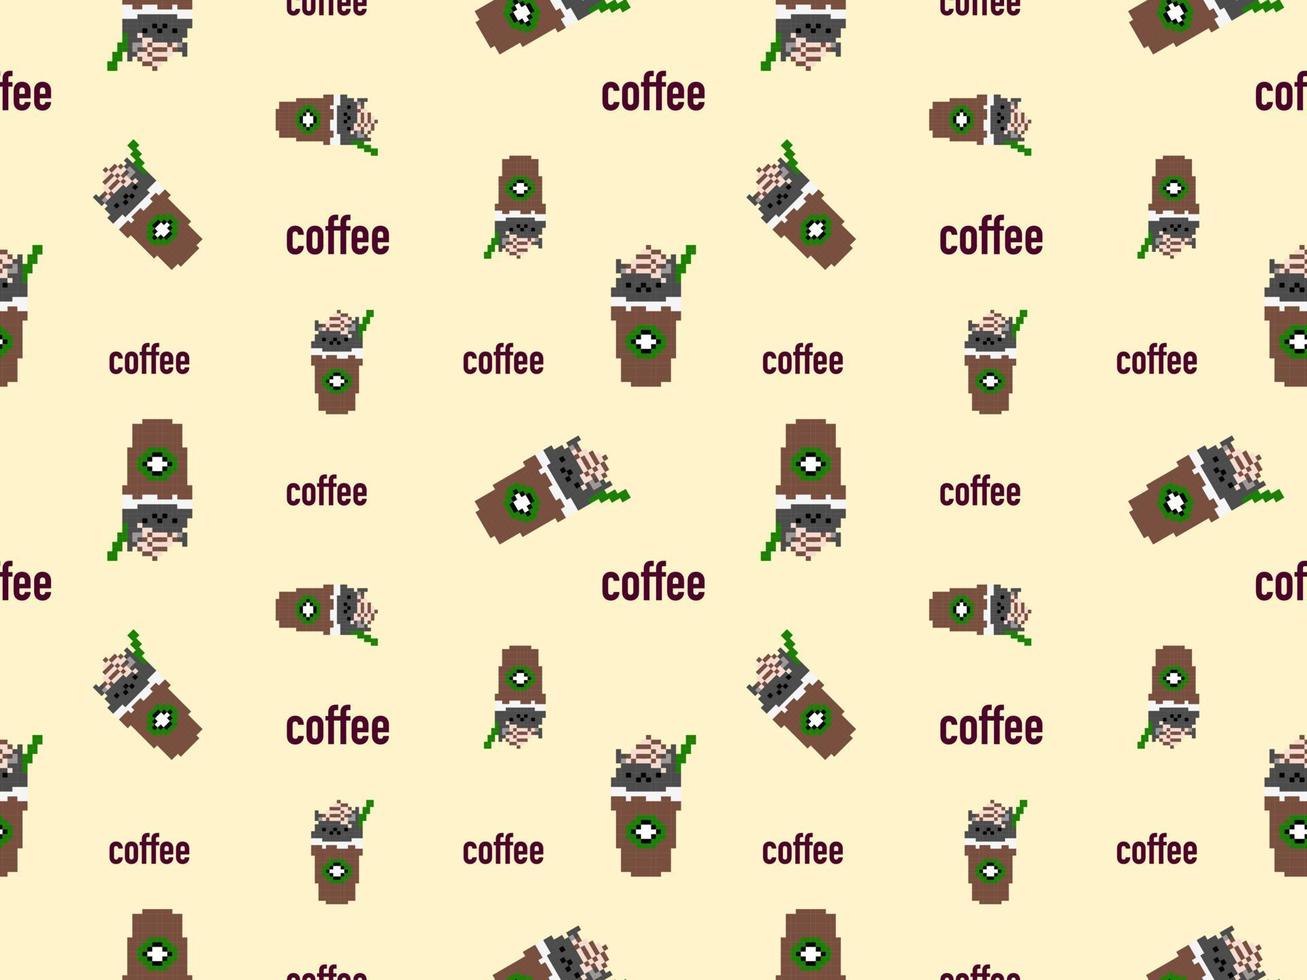 Coffee cartoon character seamless pattern on yellow background.Pixel style vector